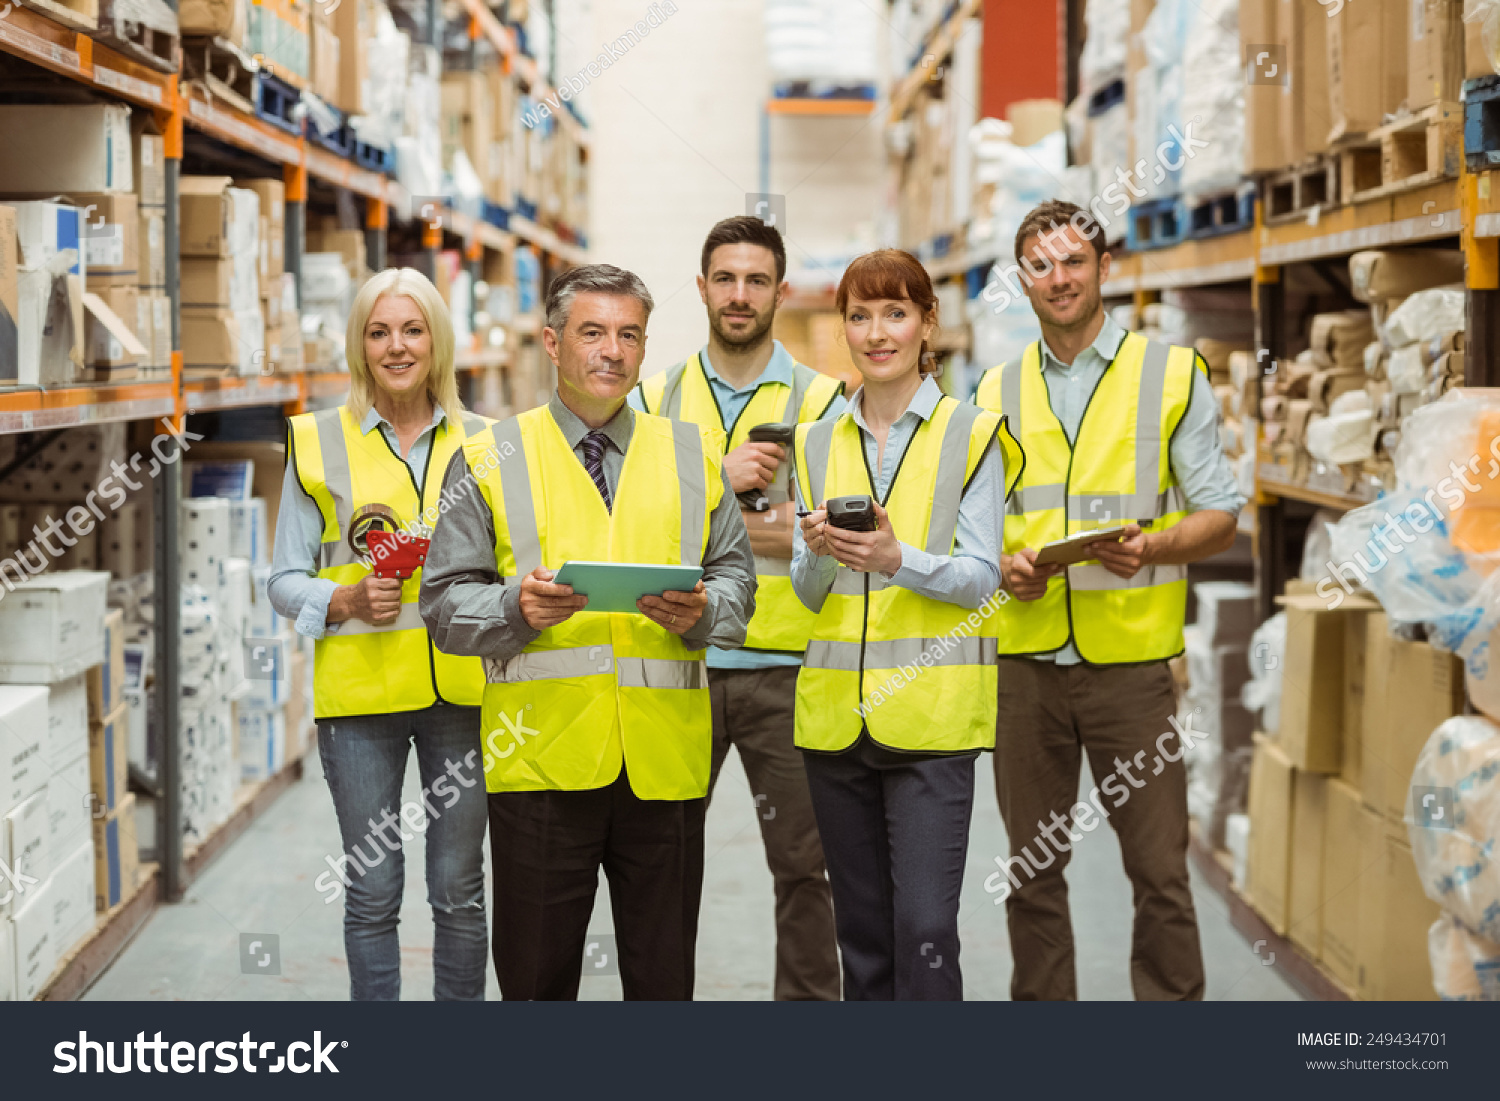 Smiling warehouse team looking at camera in a large warehouse #249434701